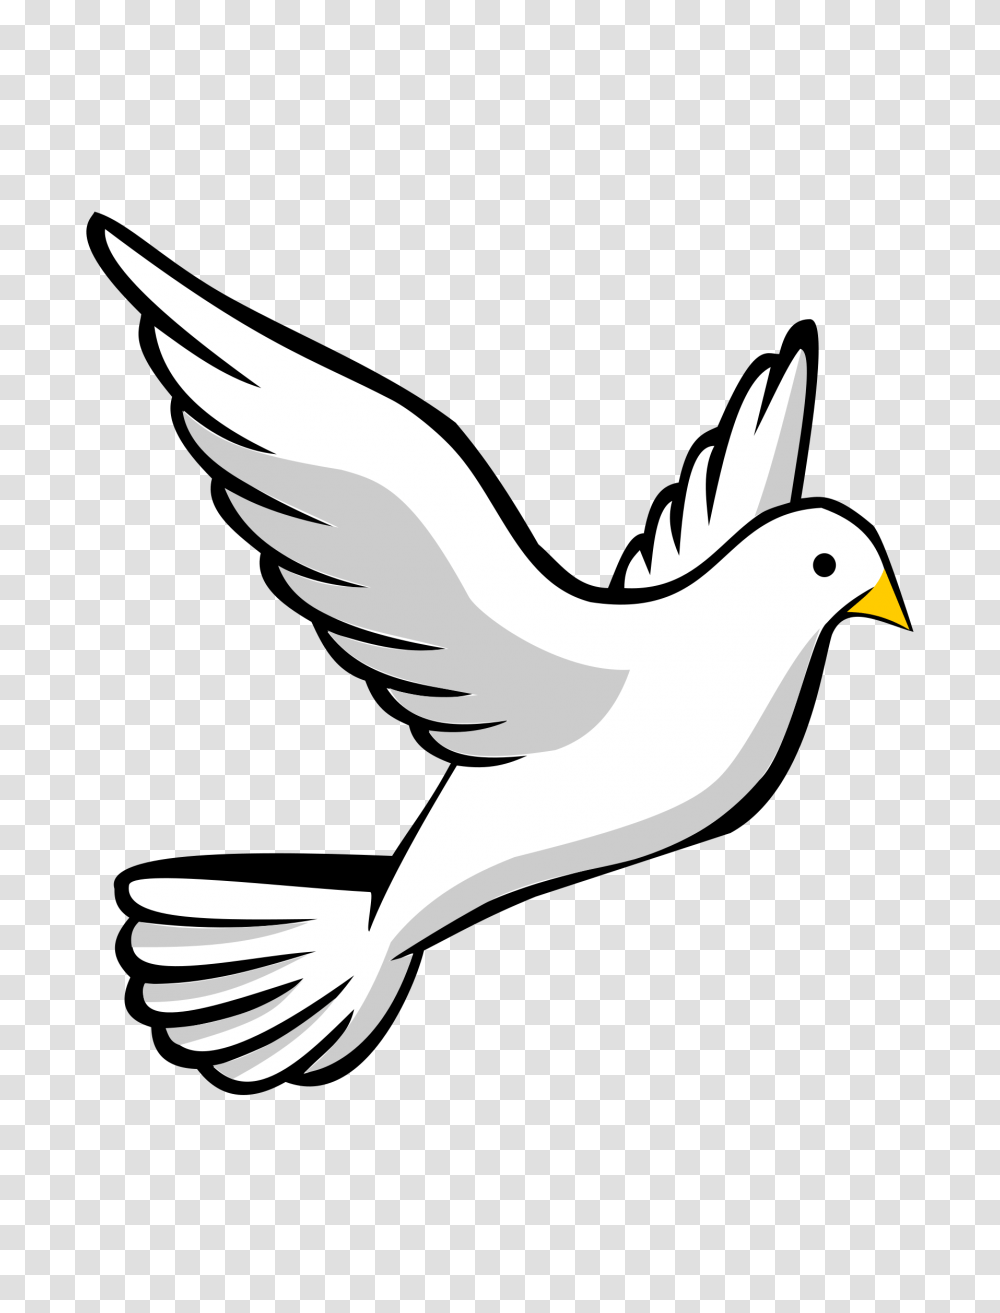 Library Of Free Image Royalty African Carrying Water Clipart Dove, Bird, Animal, Flying, Sea Life Transparent Png